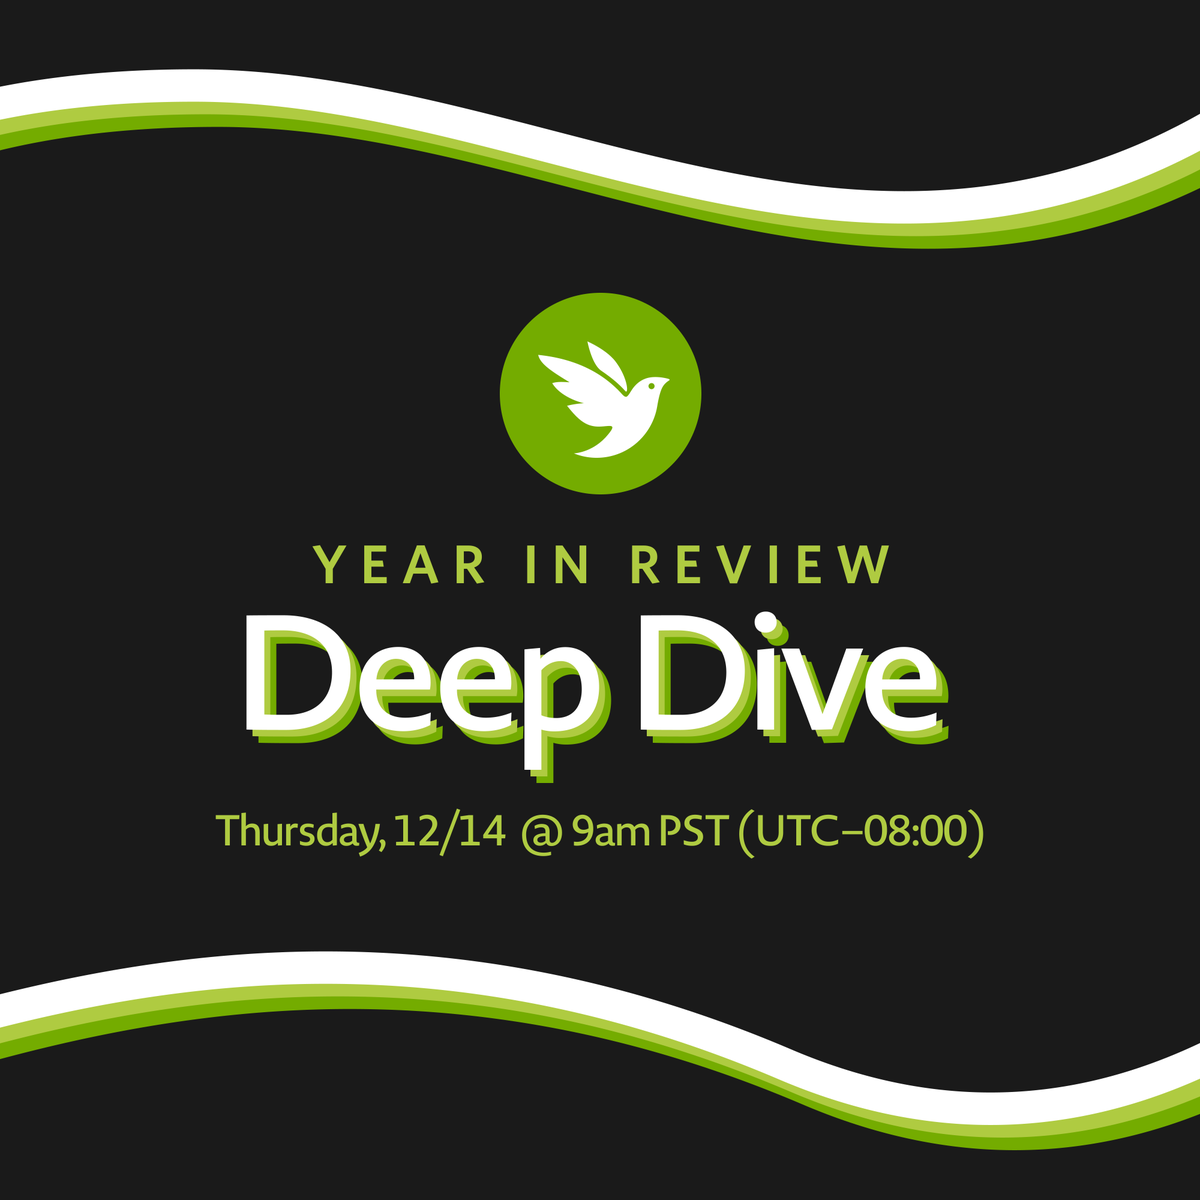 Take a live Deep Dive into iNaturalist's 2023 Year in Review next week! We'll discuss site-wide stats, as well as explore an individual Year in Review with an iNat Board Member. Register here: us06web.zoom.us/webinar/regist… #nature #communityscience #biodiversity